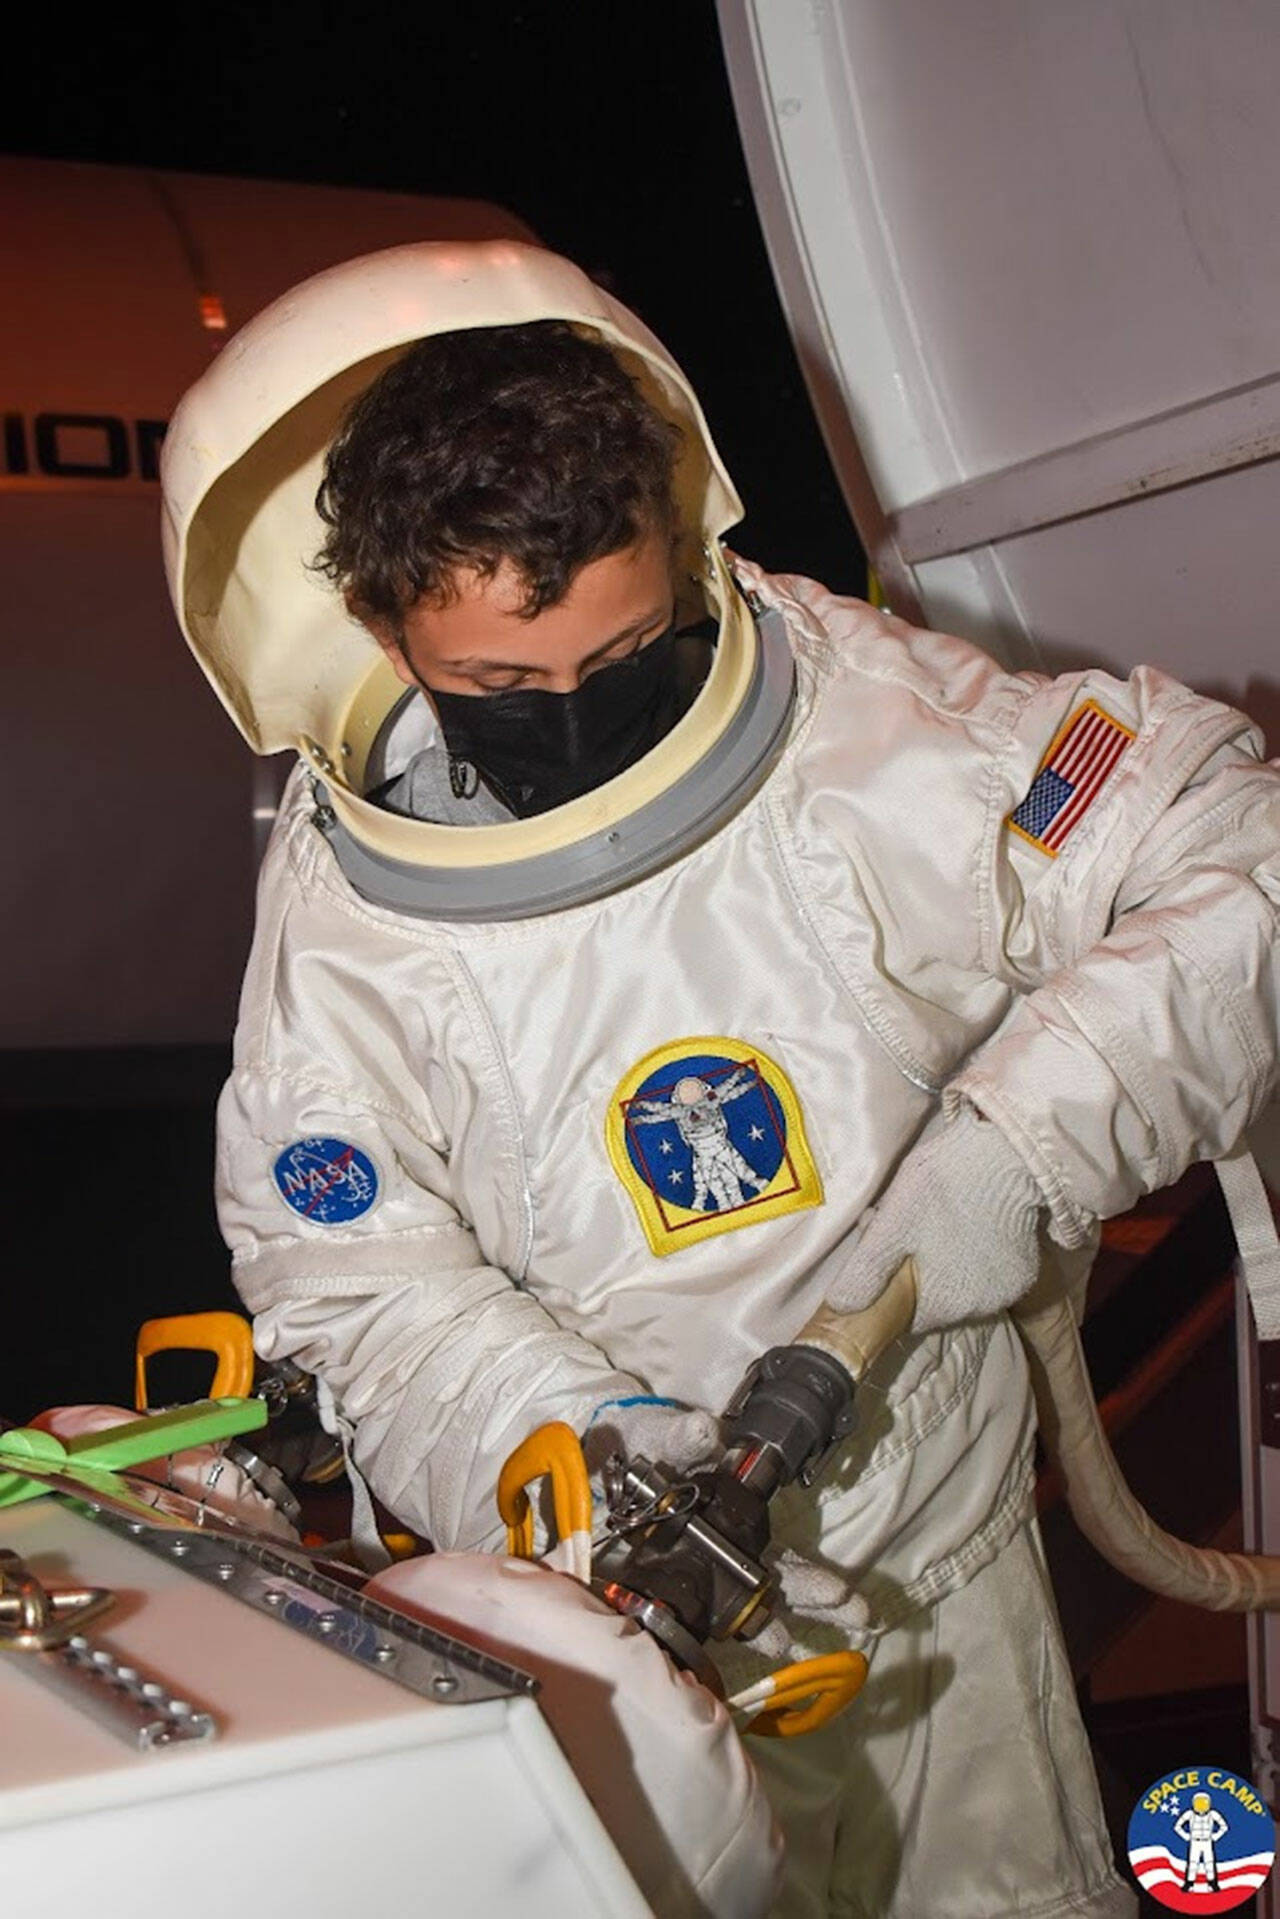 (Photo Courtesy Allison Clemons) Tom Clemons, suited up at Space Camp. The program has had nearly 1 million trainees graduate from its programs since its inception in 1982.